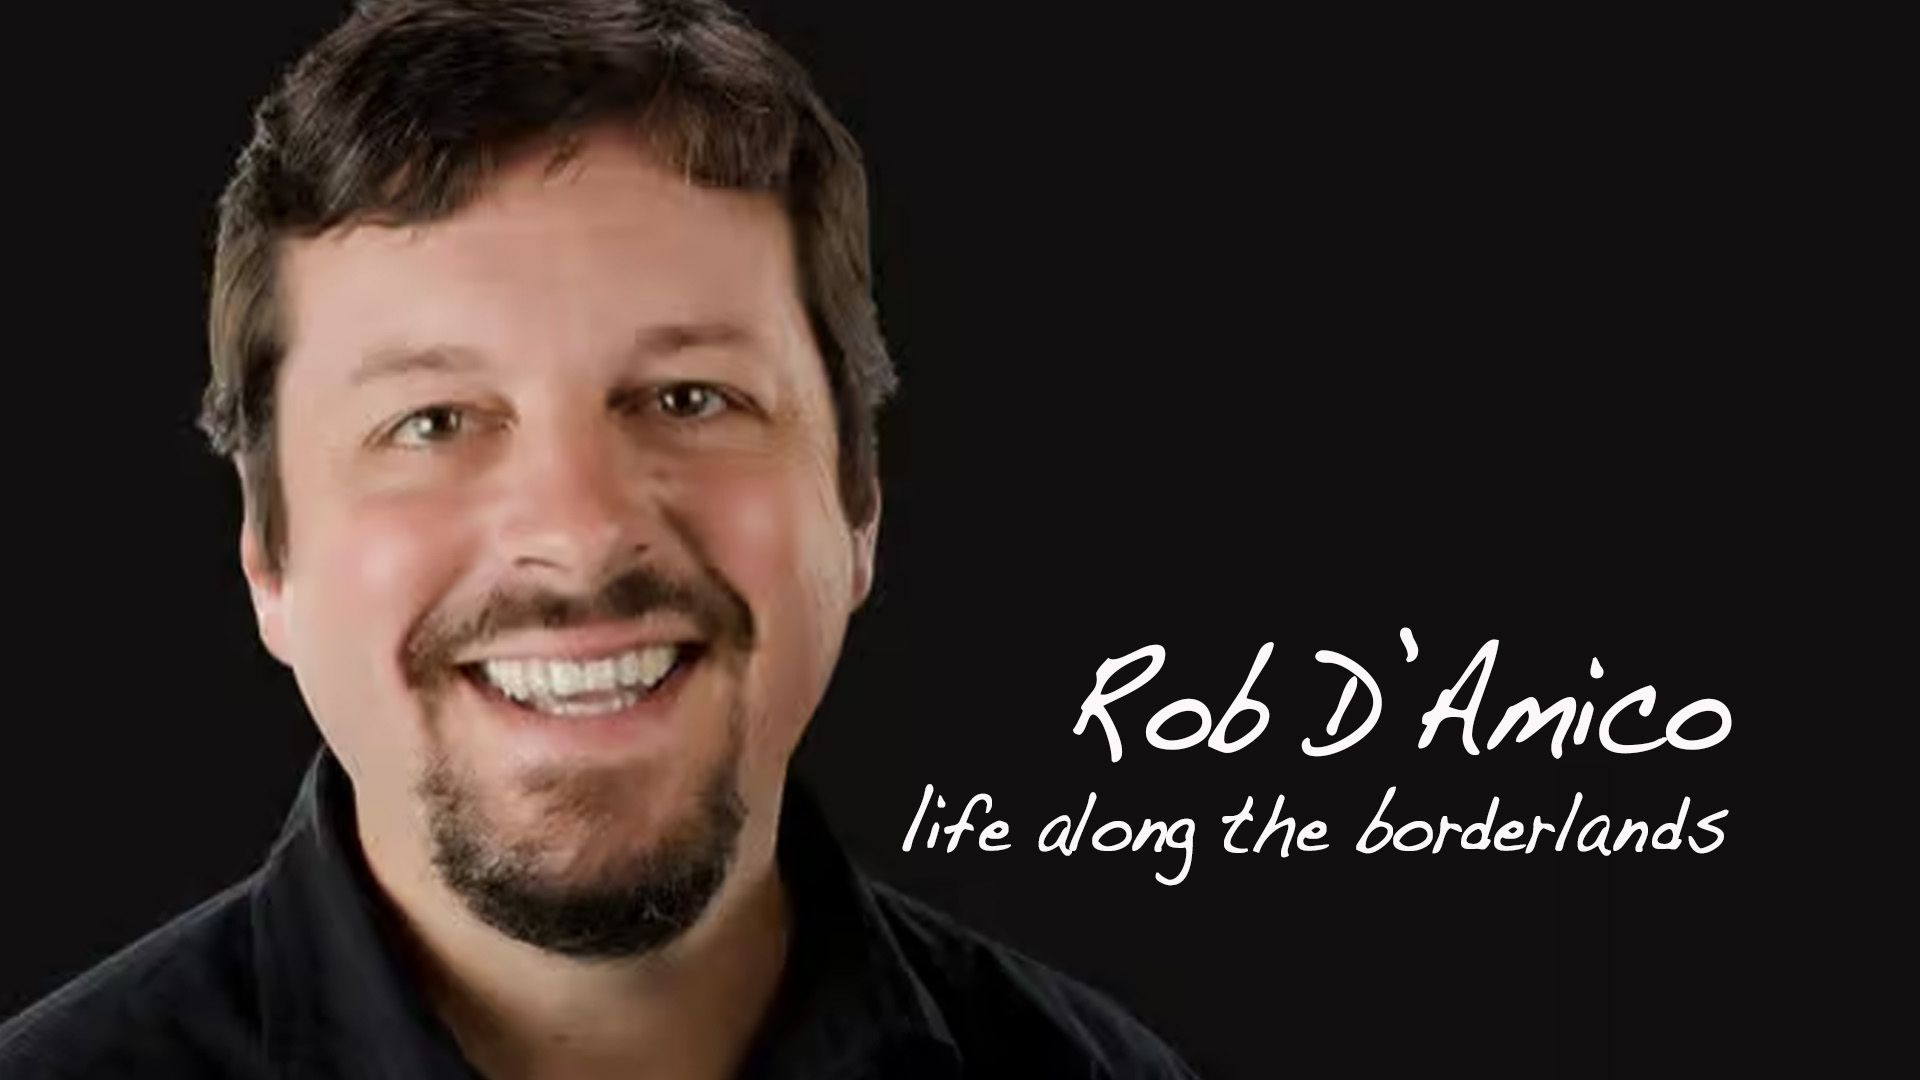 Texas Outlaw Writer's Podcast: Rob D'Amico - Life Along the Borderlands